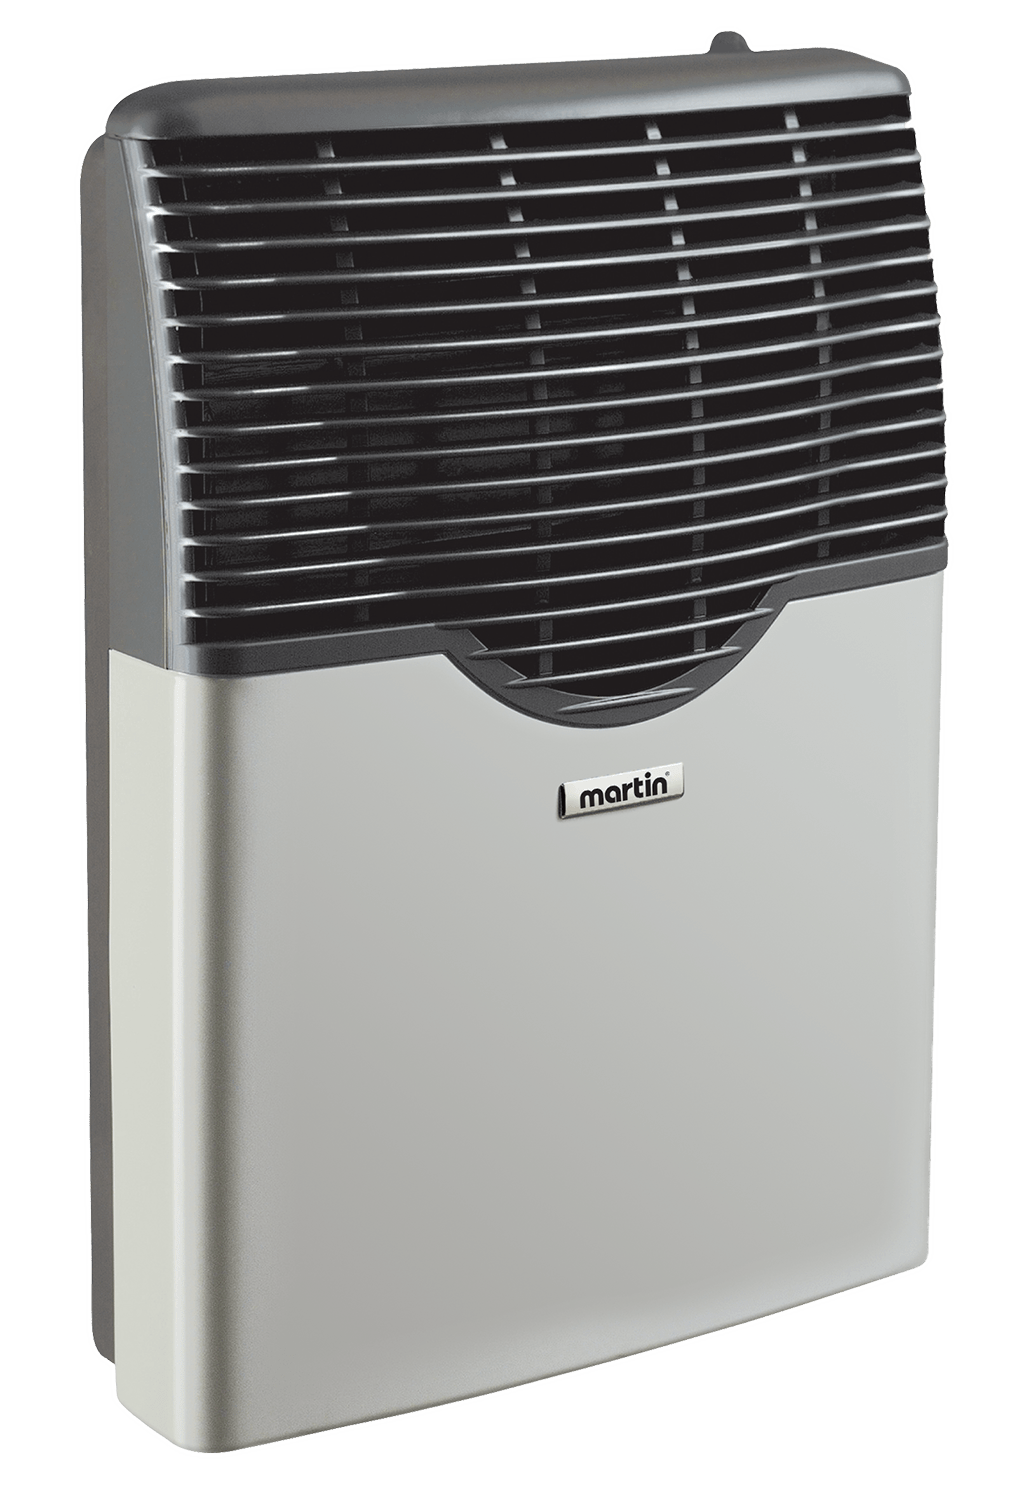 Martin Heaters Martin Natural Gas Direct Vent Thermostatic Heater 11,000 Btu MDV12N - Free Shipping!